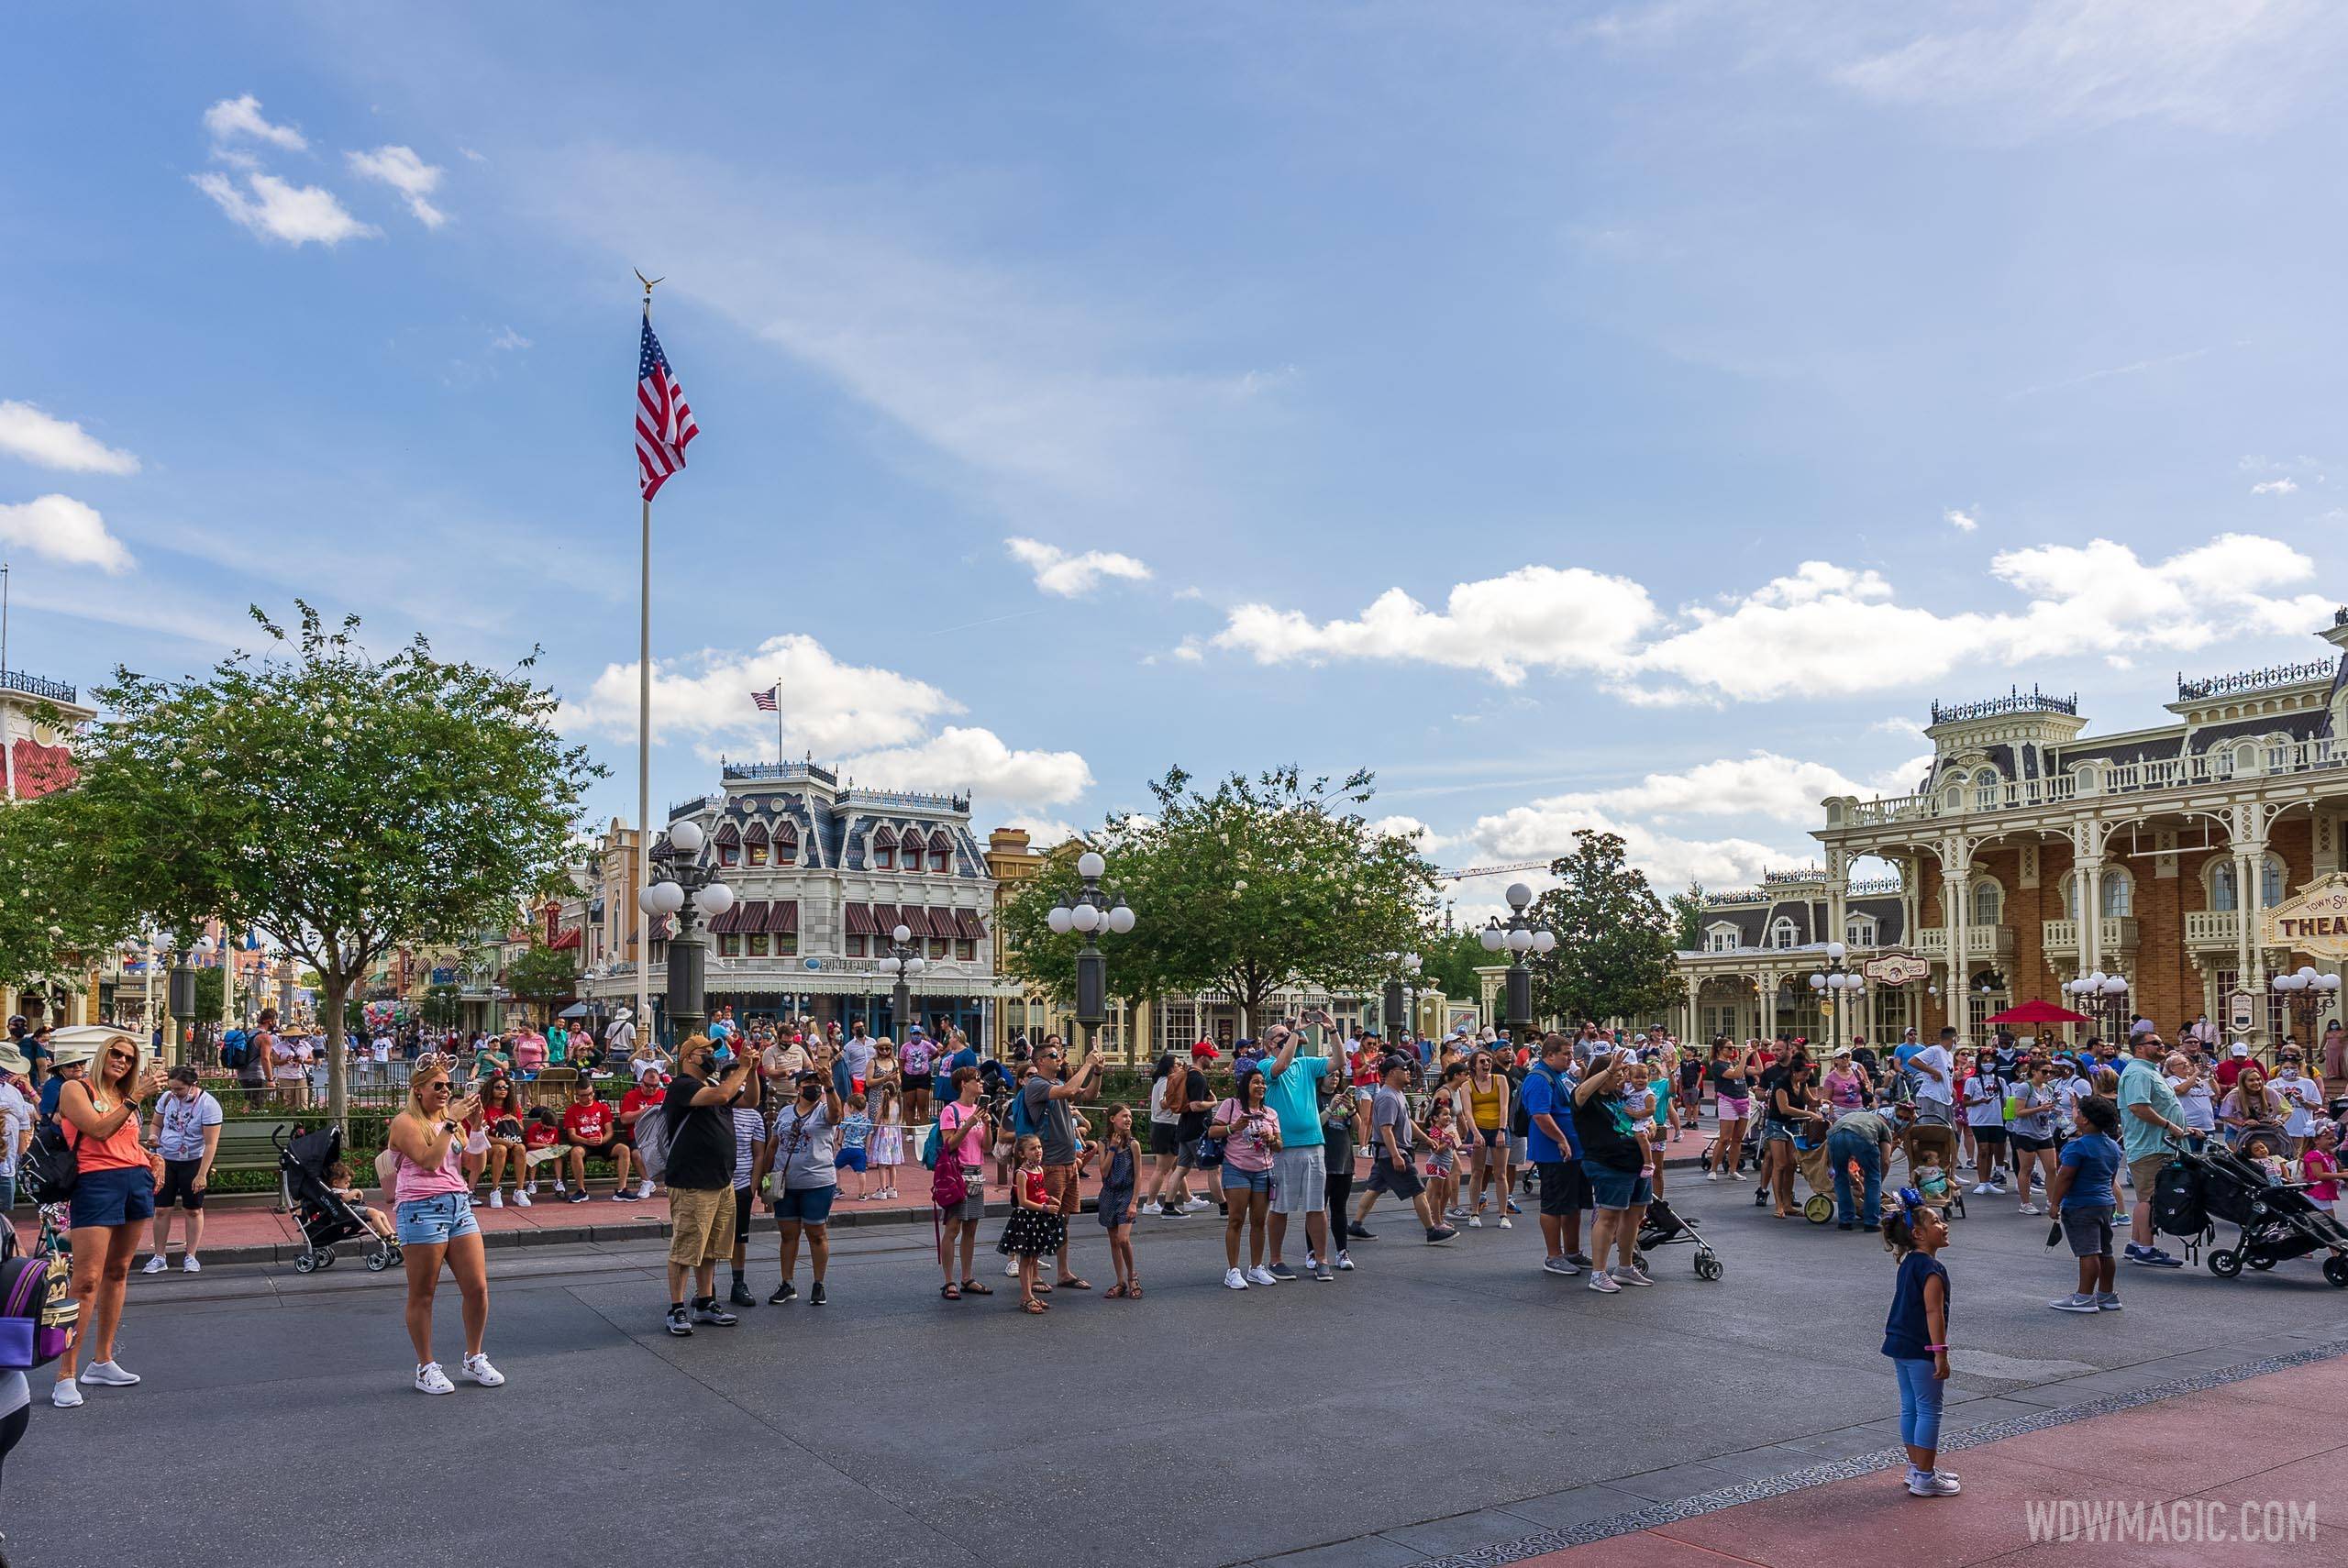 Most guests are not wearing masks when outdoors at Magic Kingdom